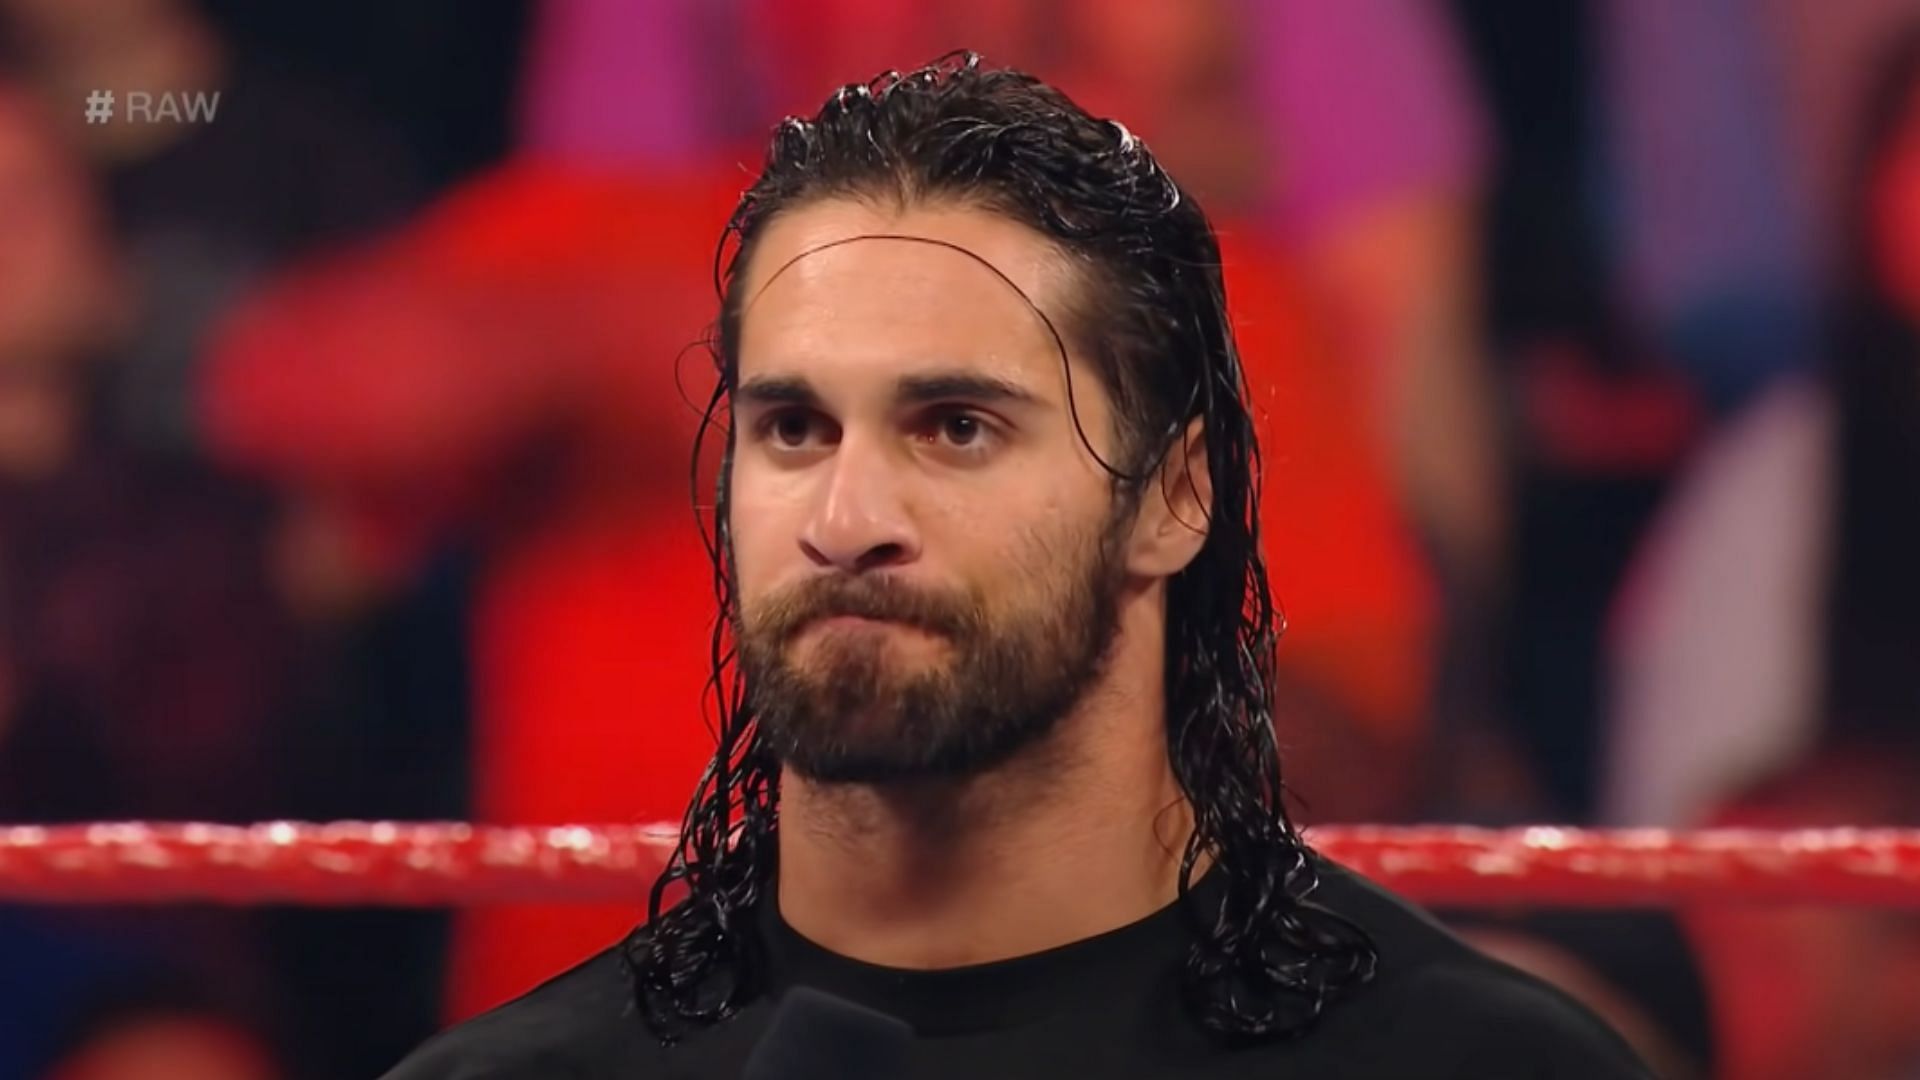 Seth Rollins has been one of WWE